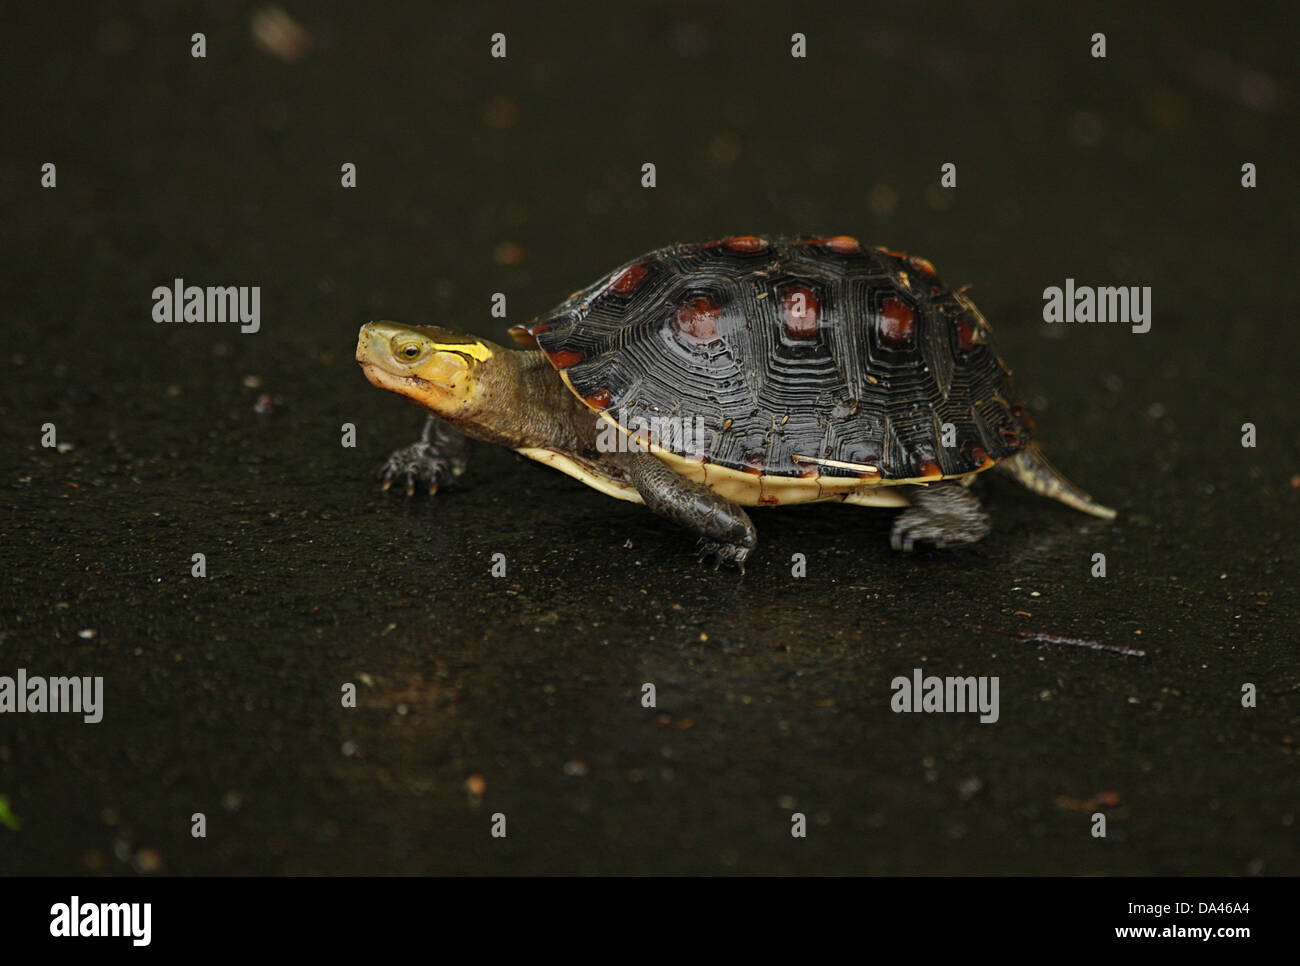 Chinese Box Turtle (Cistoclemmys flavomarginata) adult, crossing wet road during rainfall, Taiwan, April Stock Photo